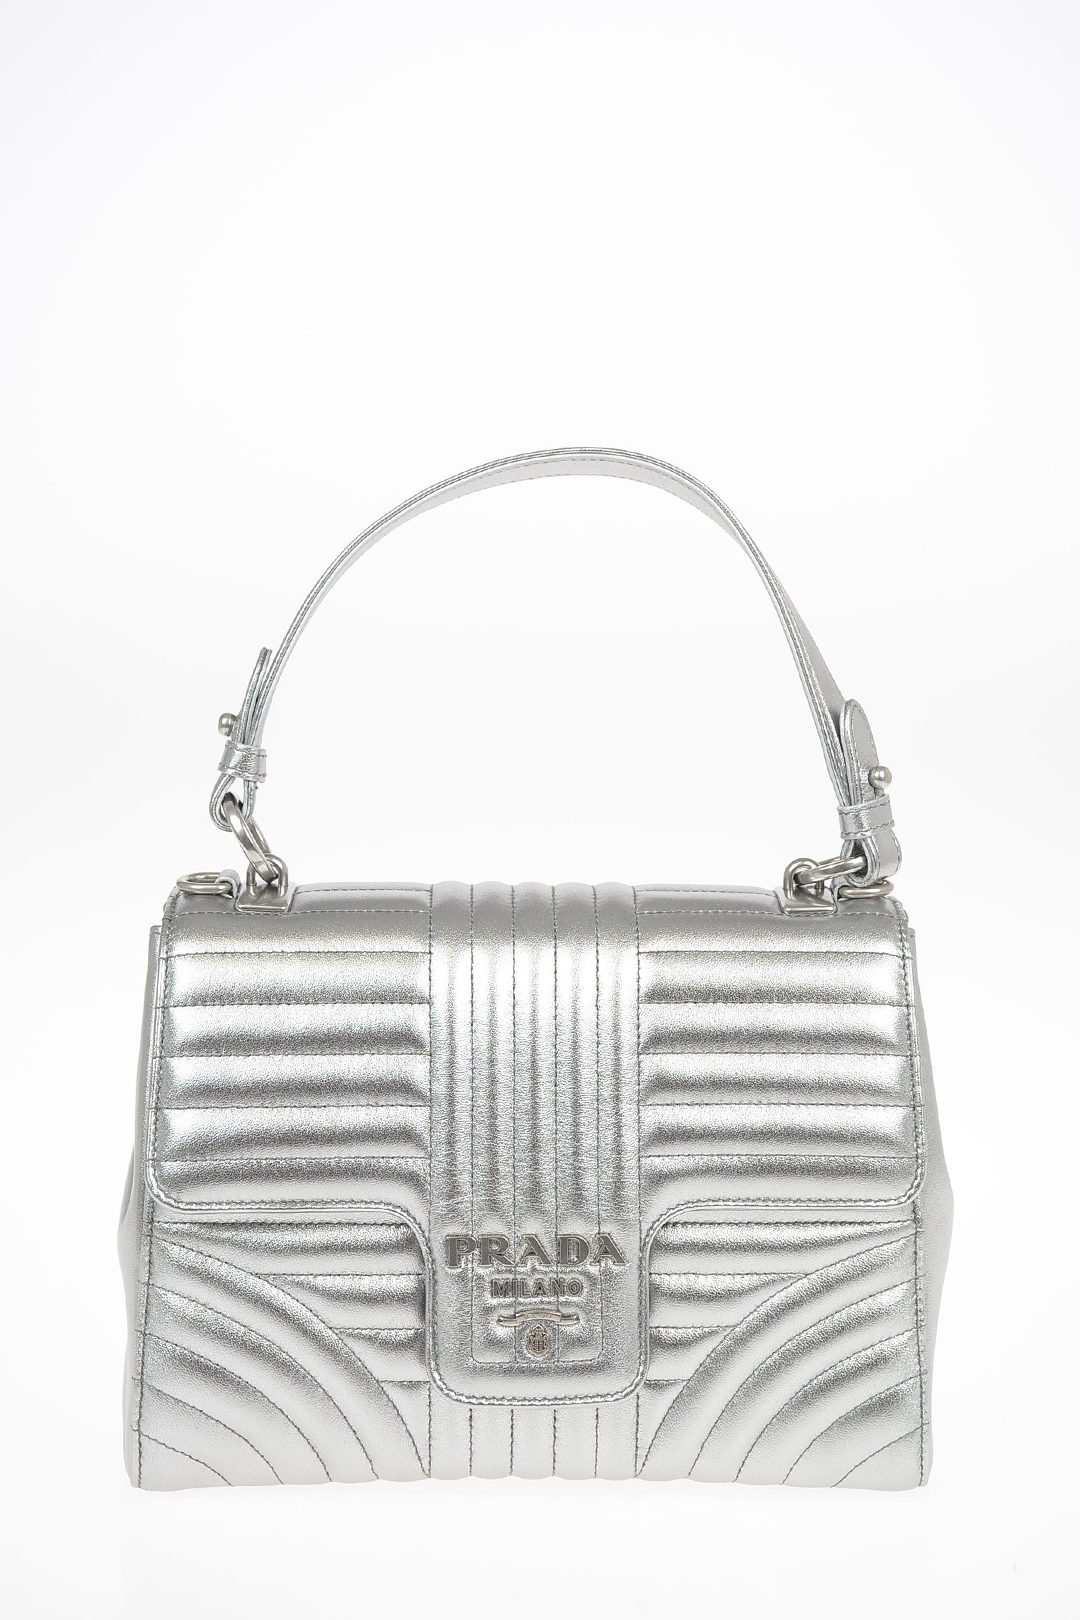 Prada Metallic Soft Leather Top Handle Bag With Removable Shoulder Chain  women - Glamood Outlet